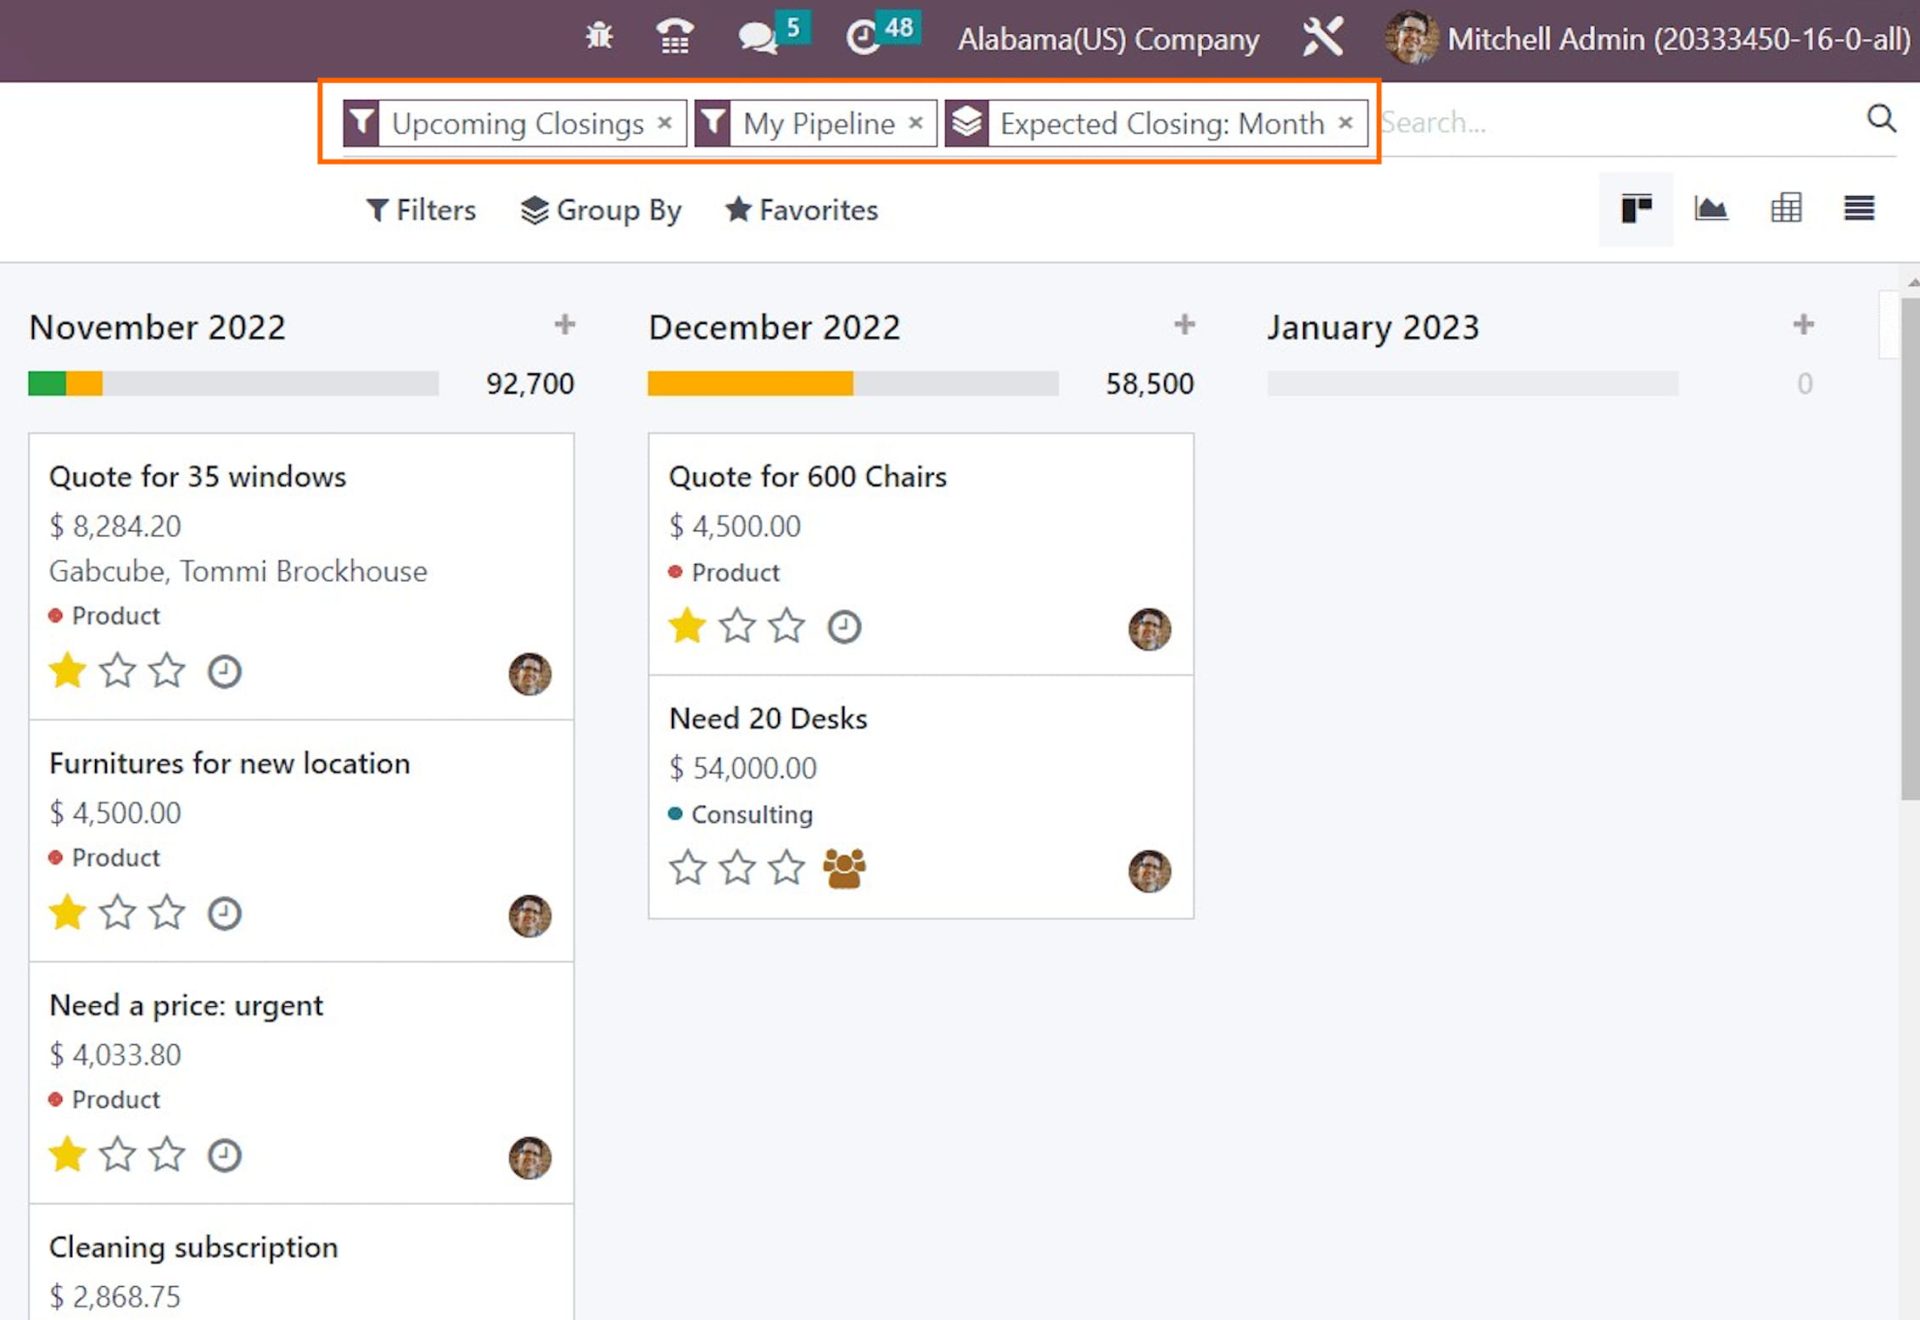 Reporting features in Odoo CRM and pipeline